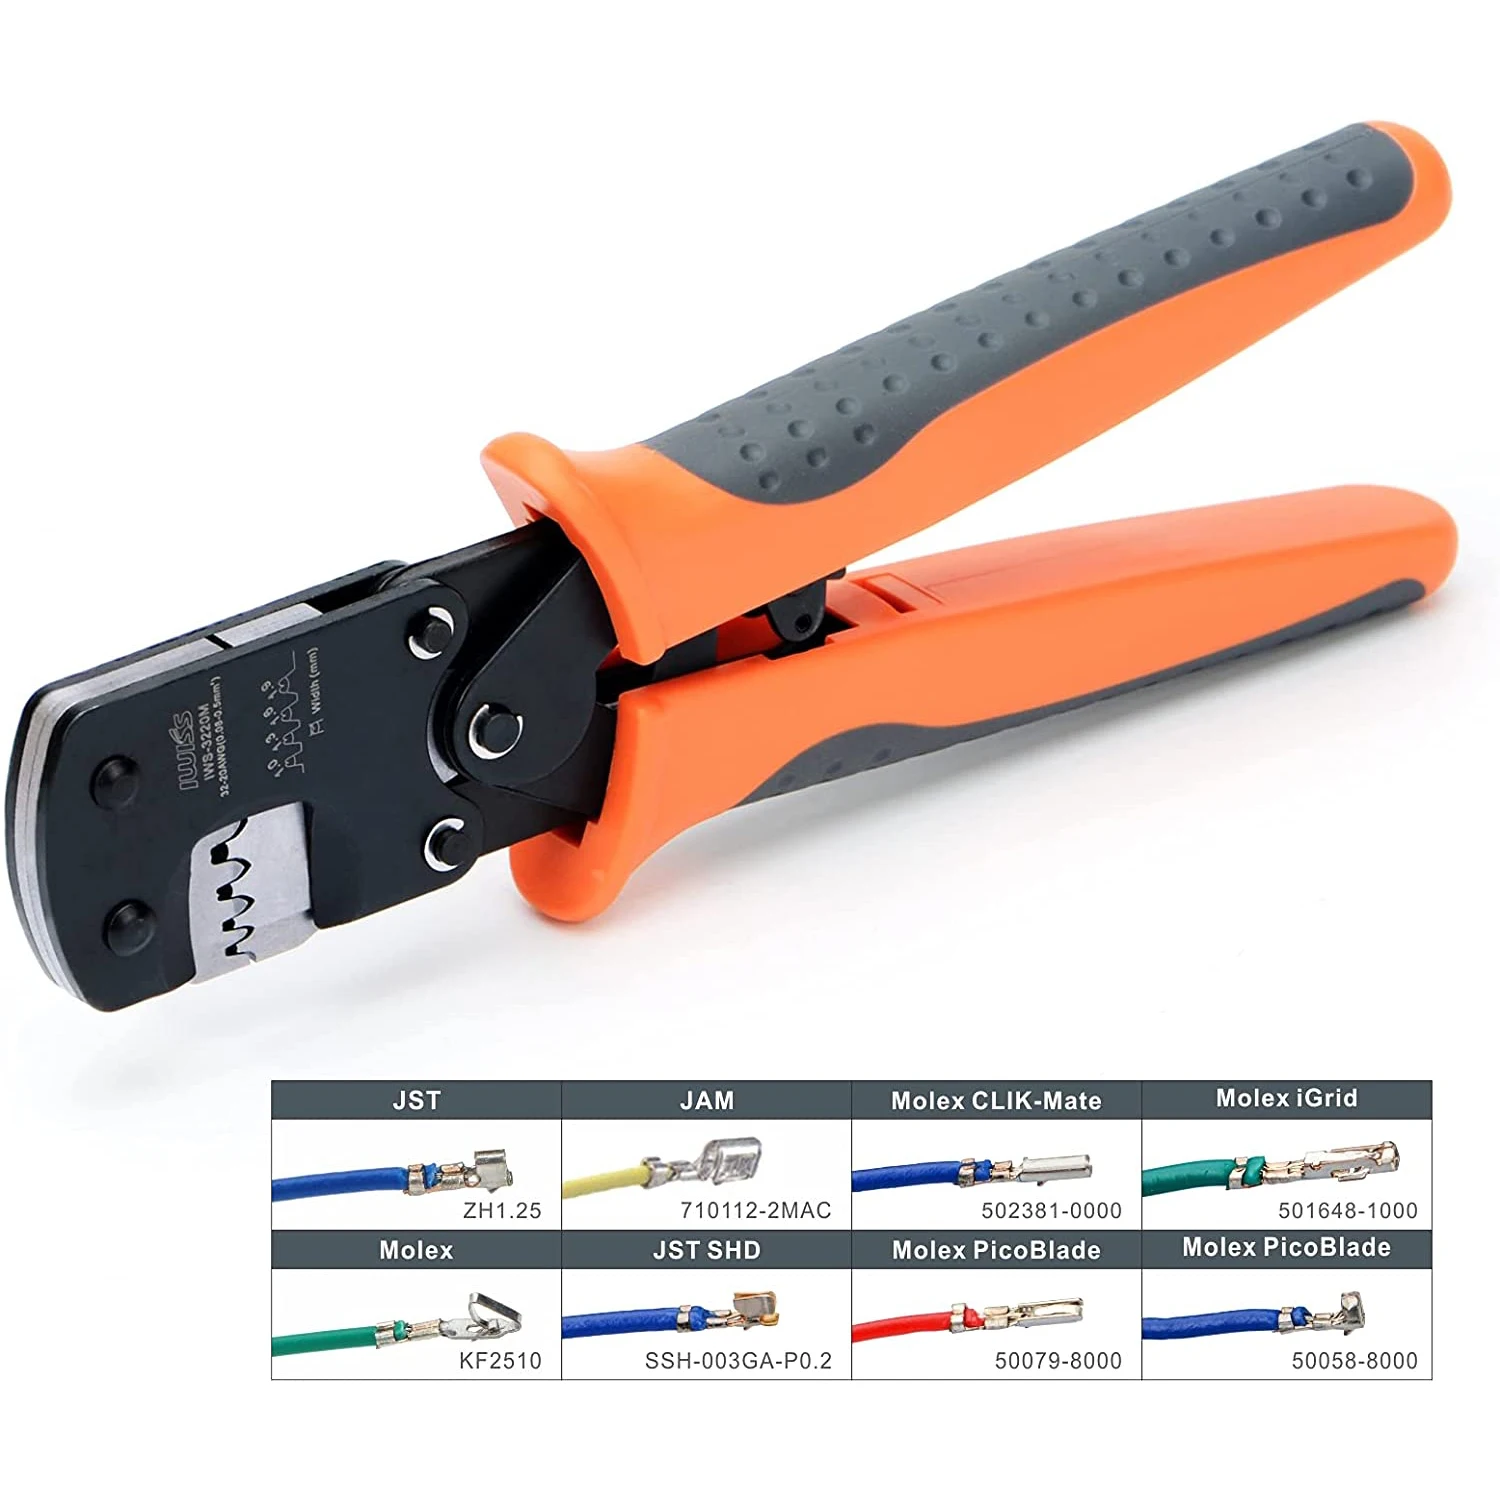 

IWS-3220 Crimping Tool For JST DuPont Terminals Mini Hand Crimping Pliers For Narrow-Pitch Connector Pins 0.03-0.5mm2 AWG: 32-20